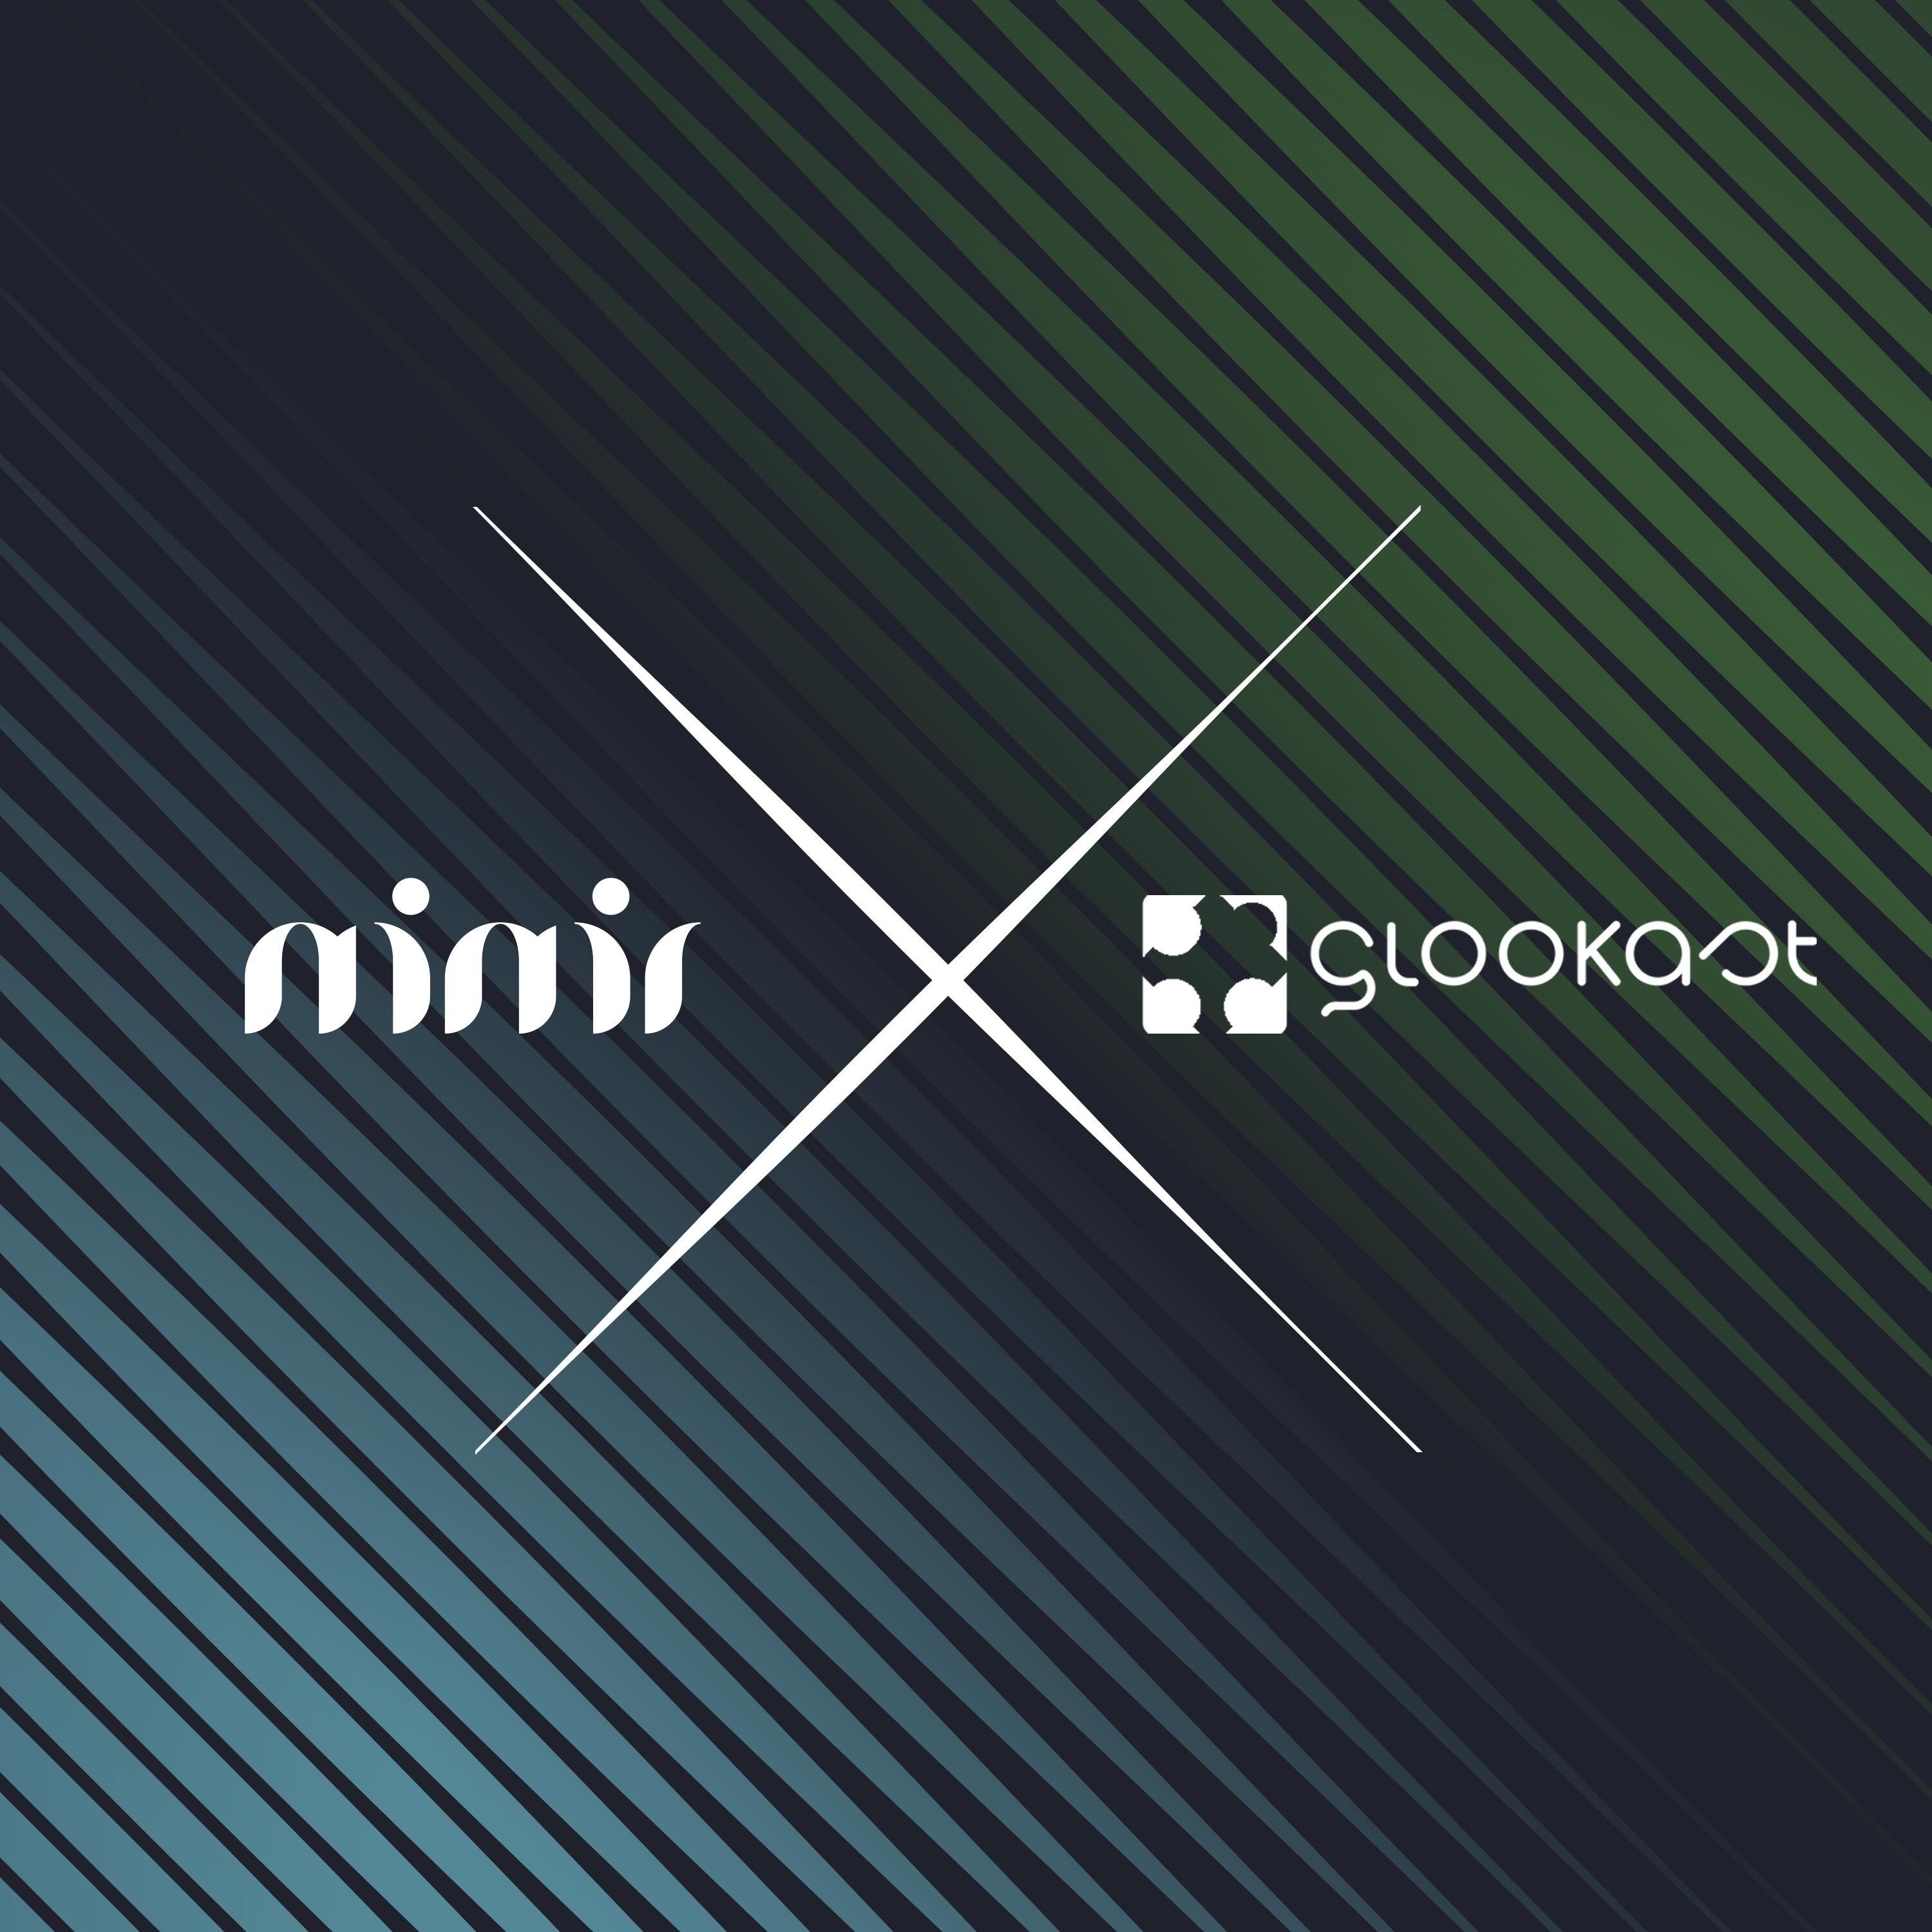 The mimir and Glookast logos together